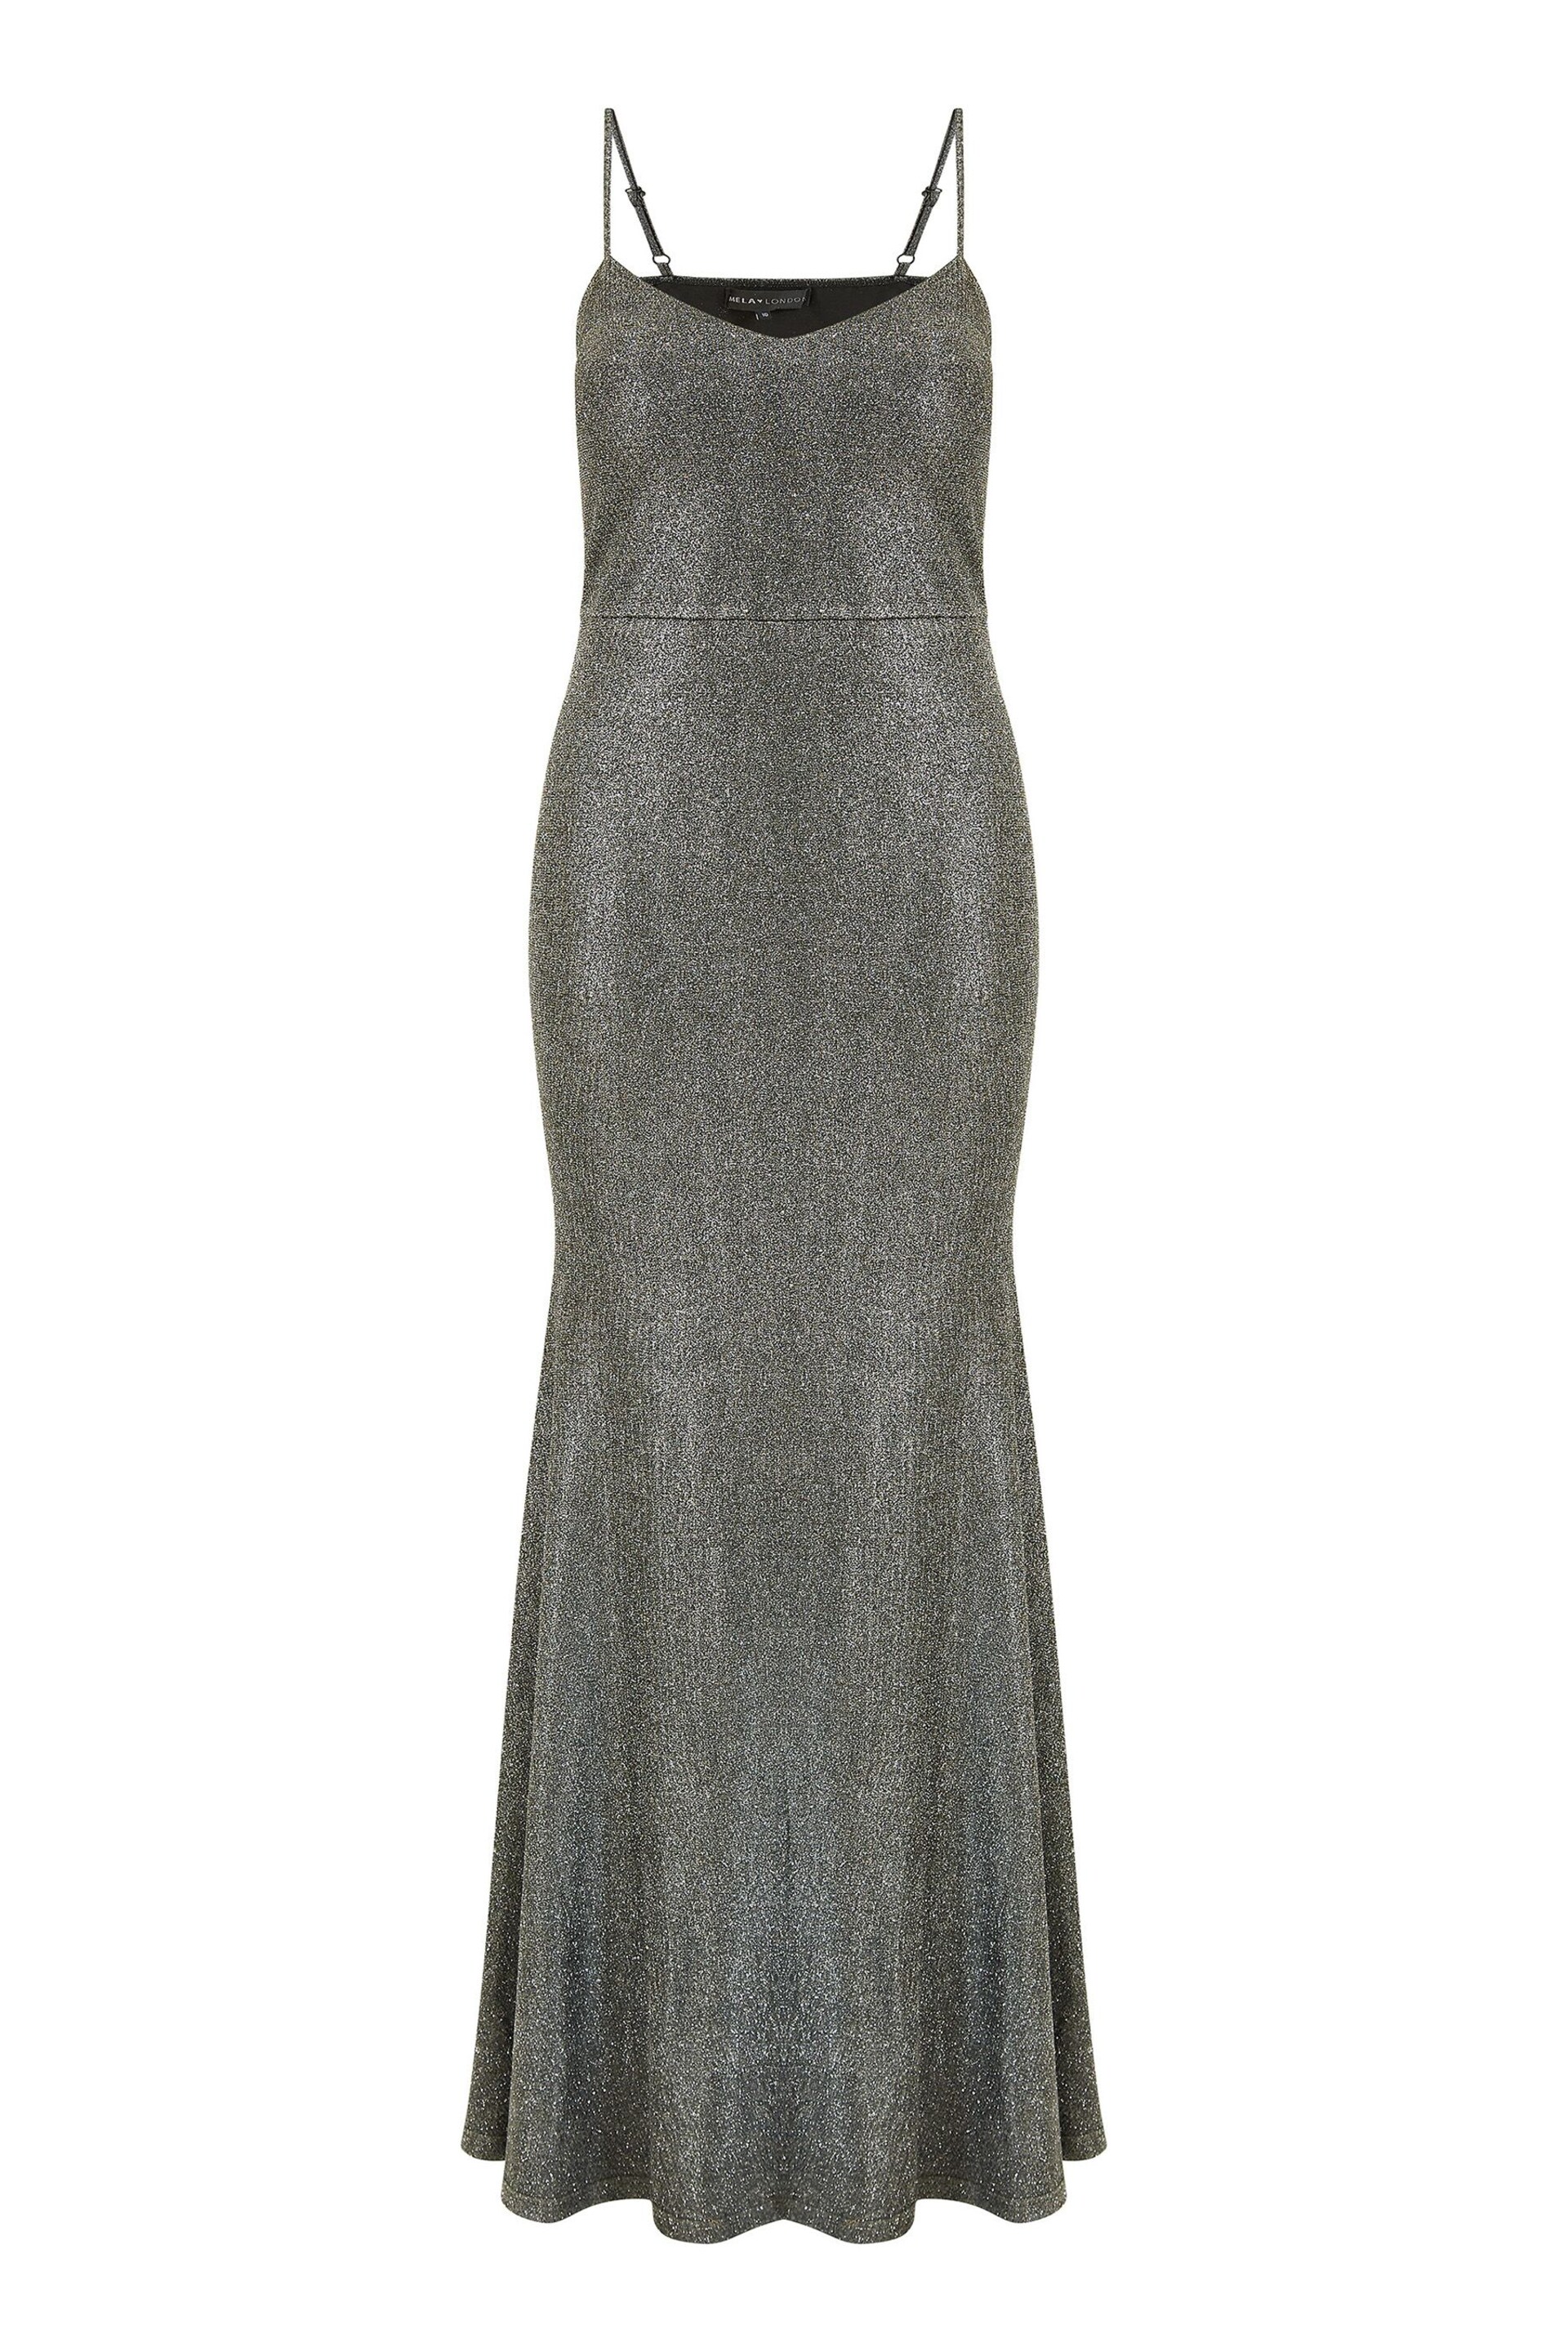 Mela Silver Fitted Strappy Maxi Dress - Image 5 of 5